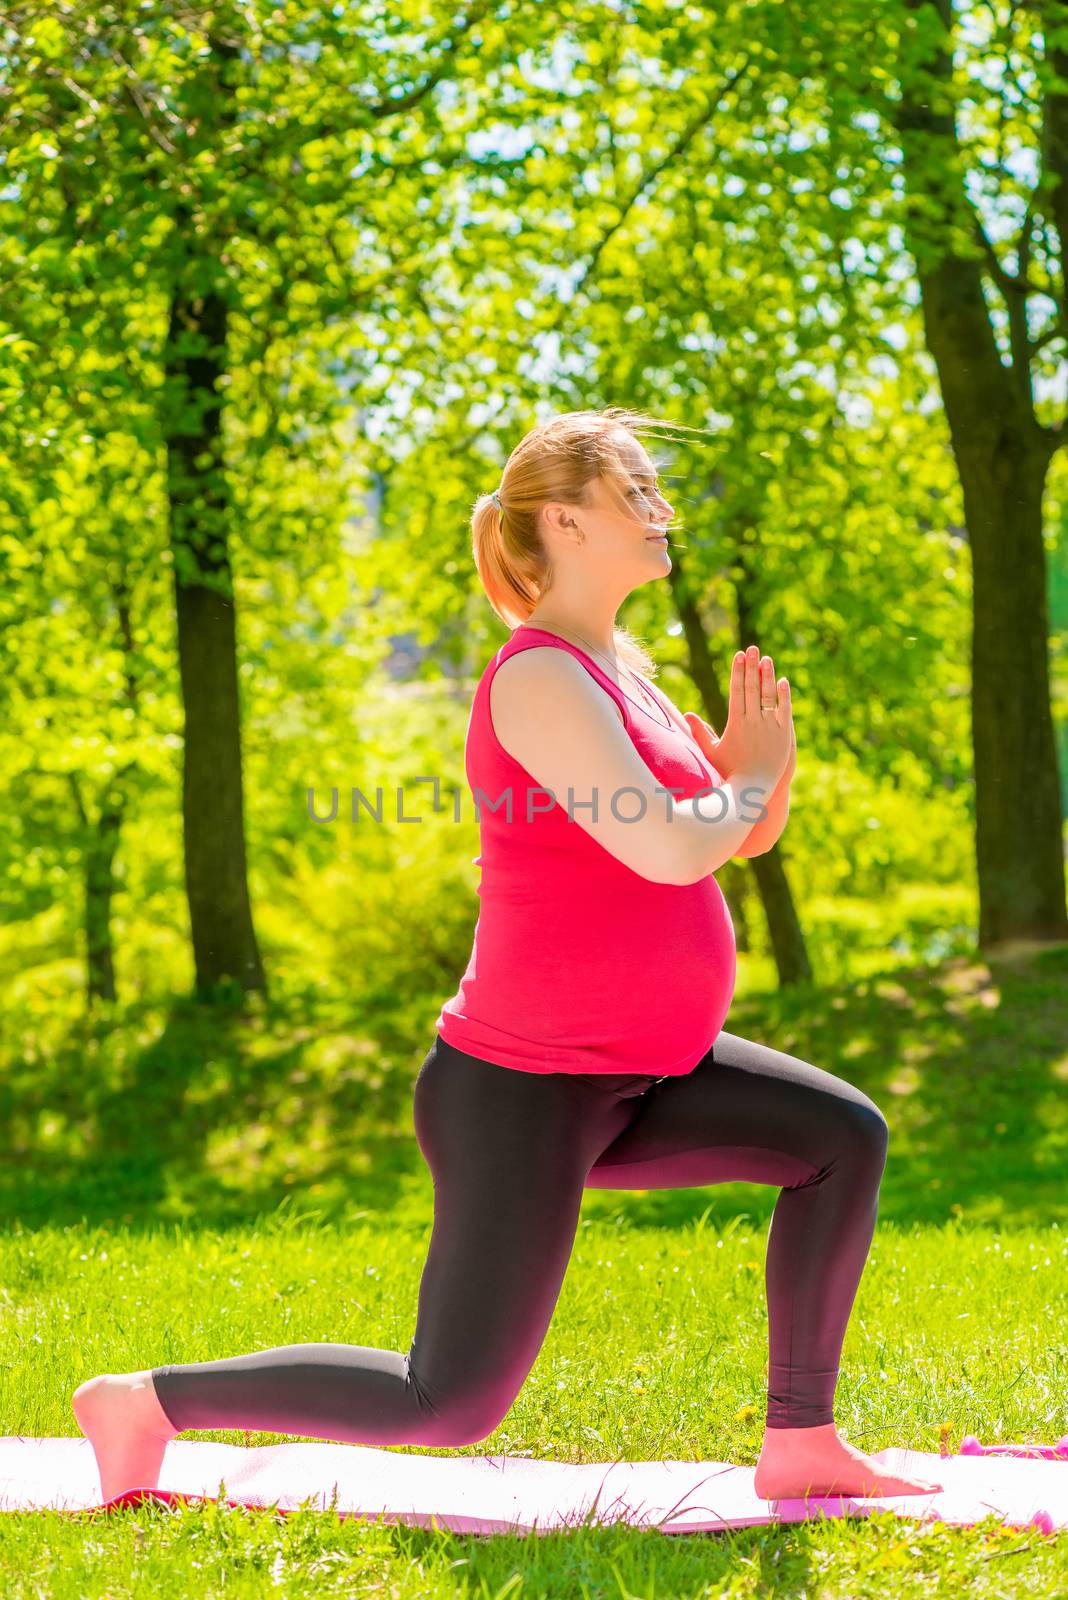 athletic girl leads an active lifestyle during pregnancy